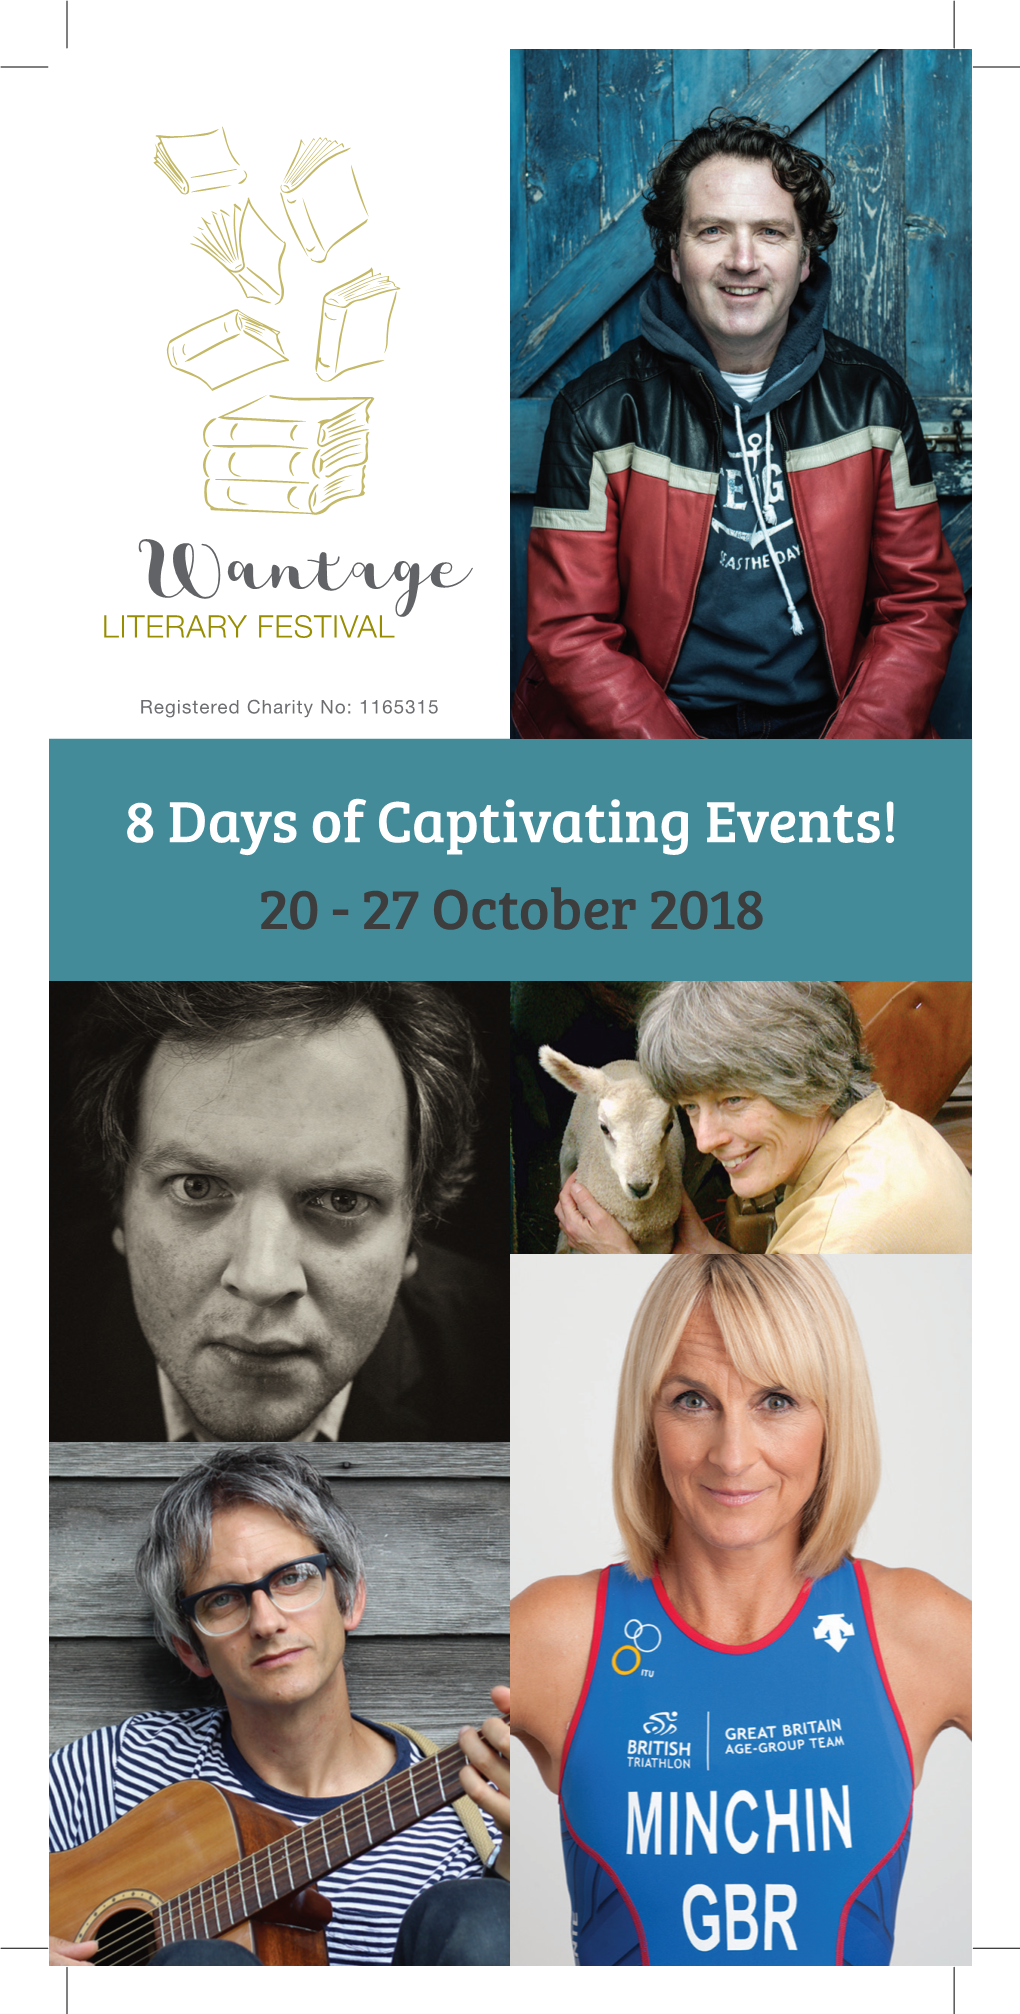 8 Days of Captivating Events! 20 - 27 October 2018